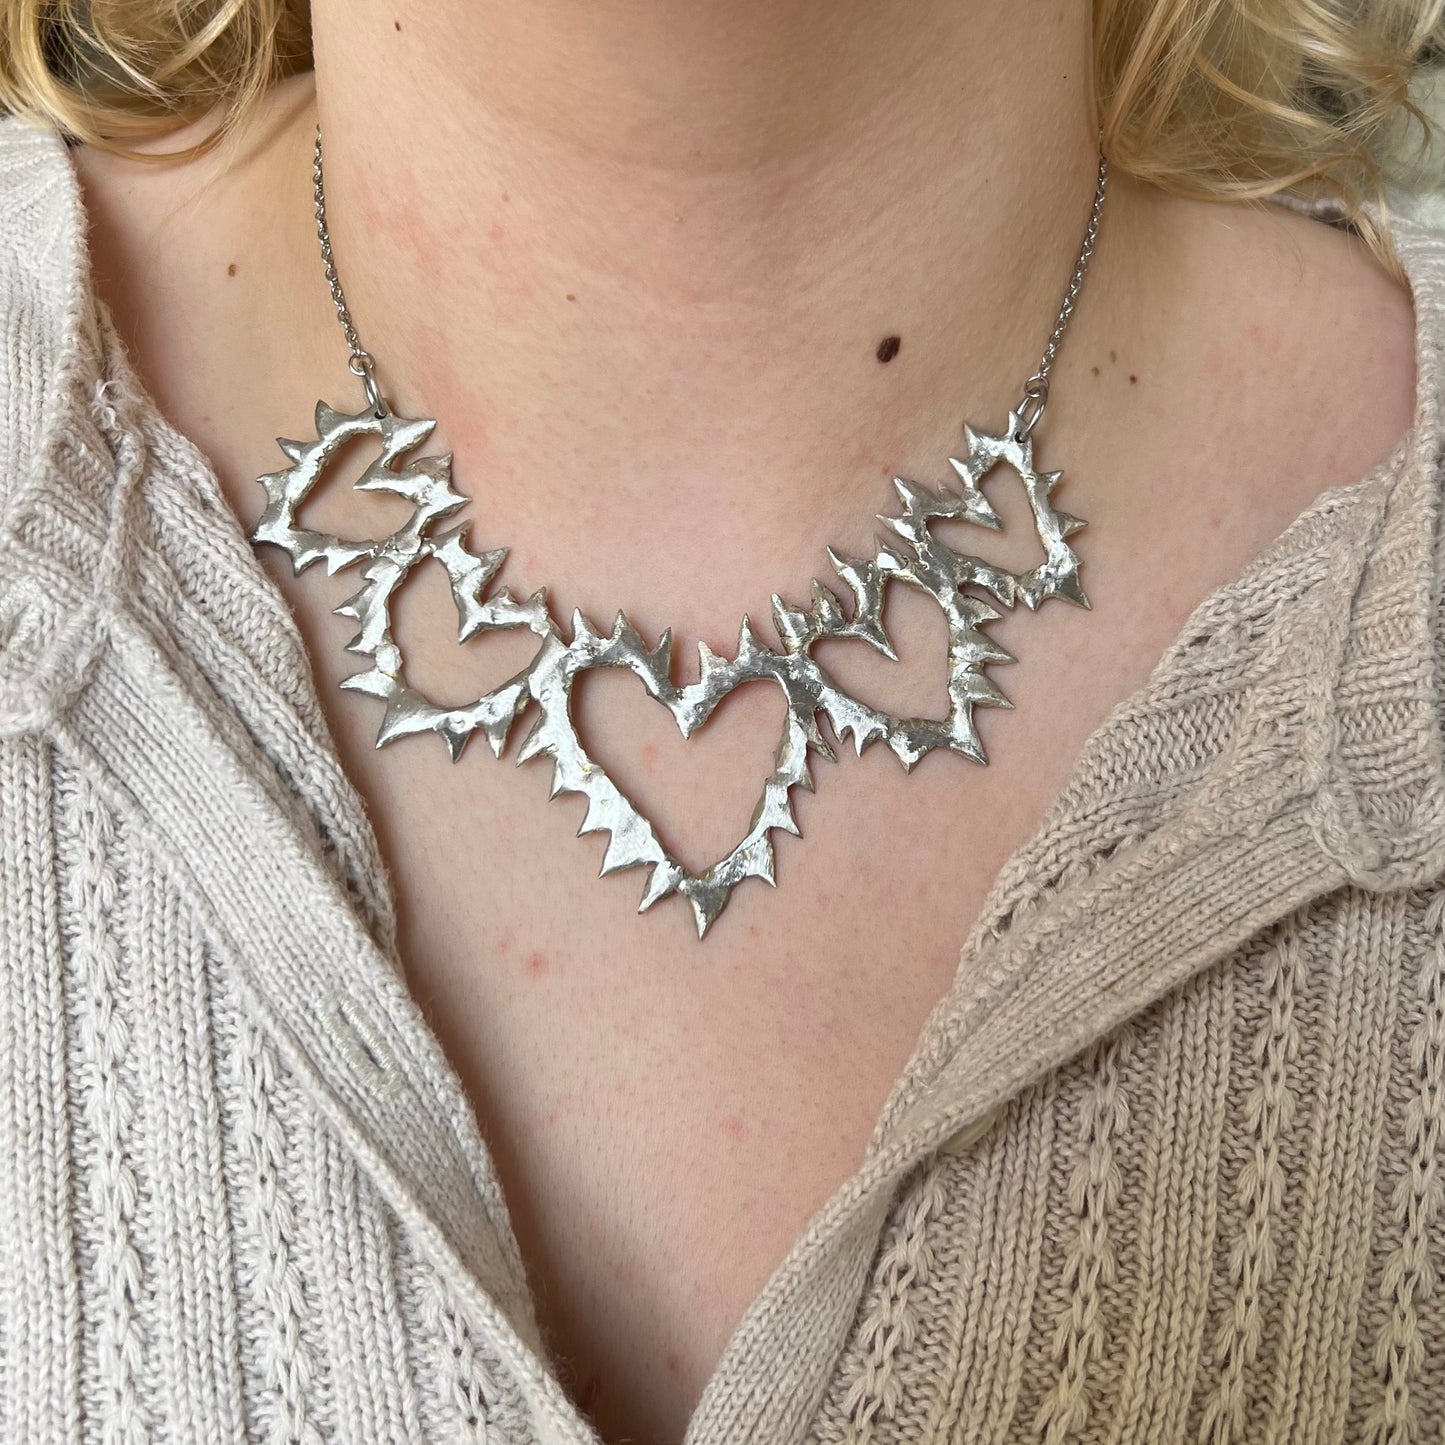 The Forever Loved Necklace